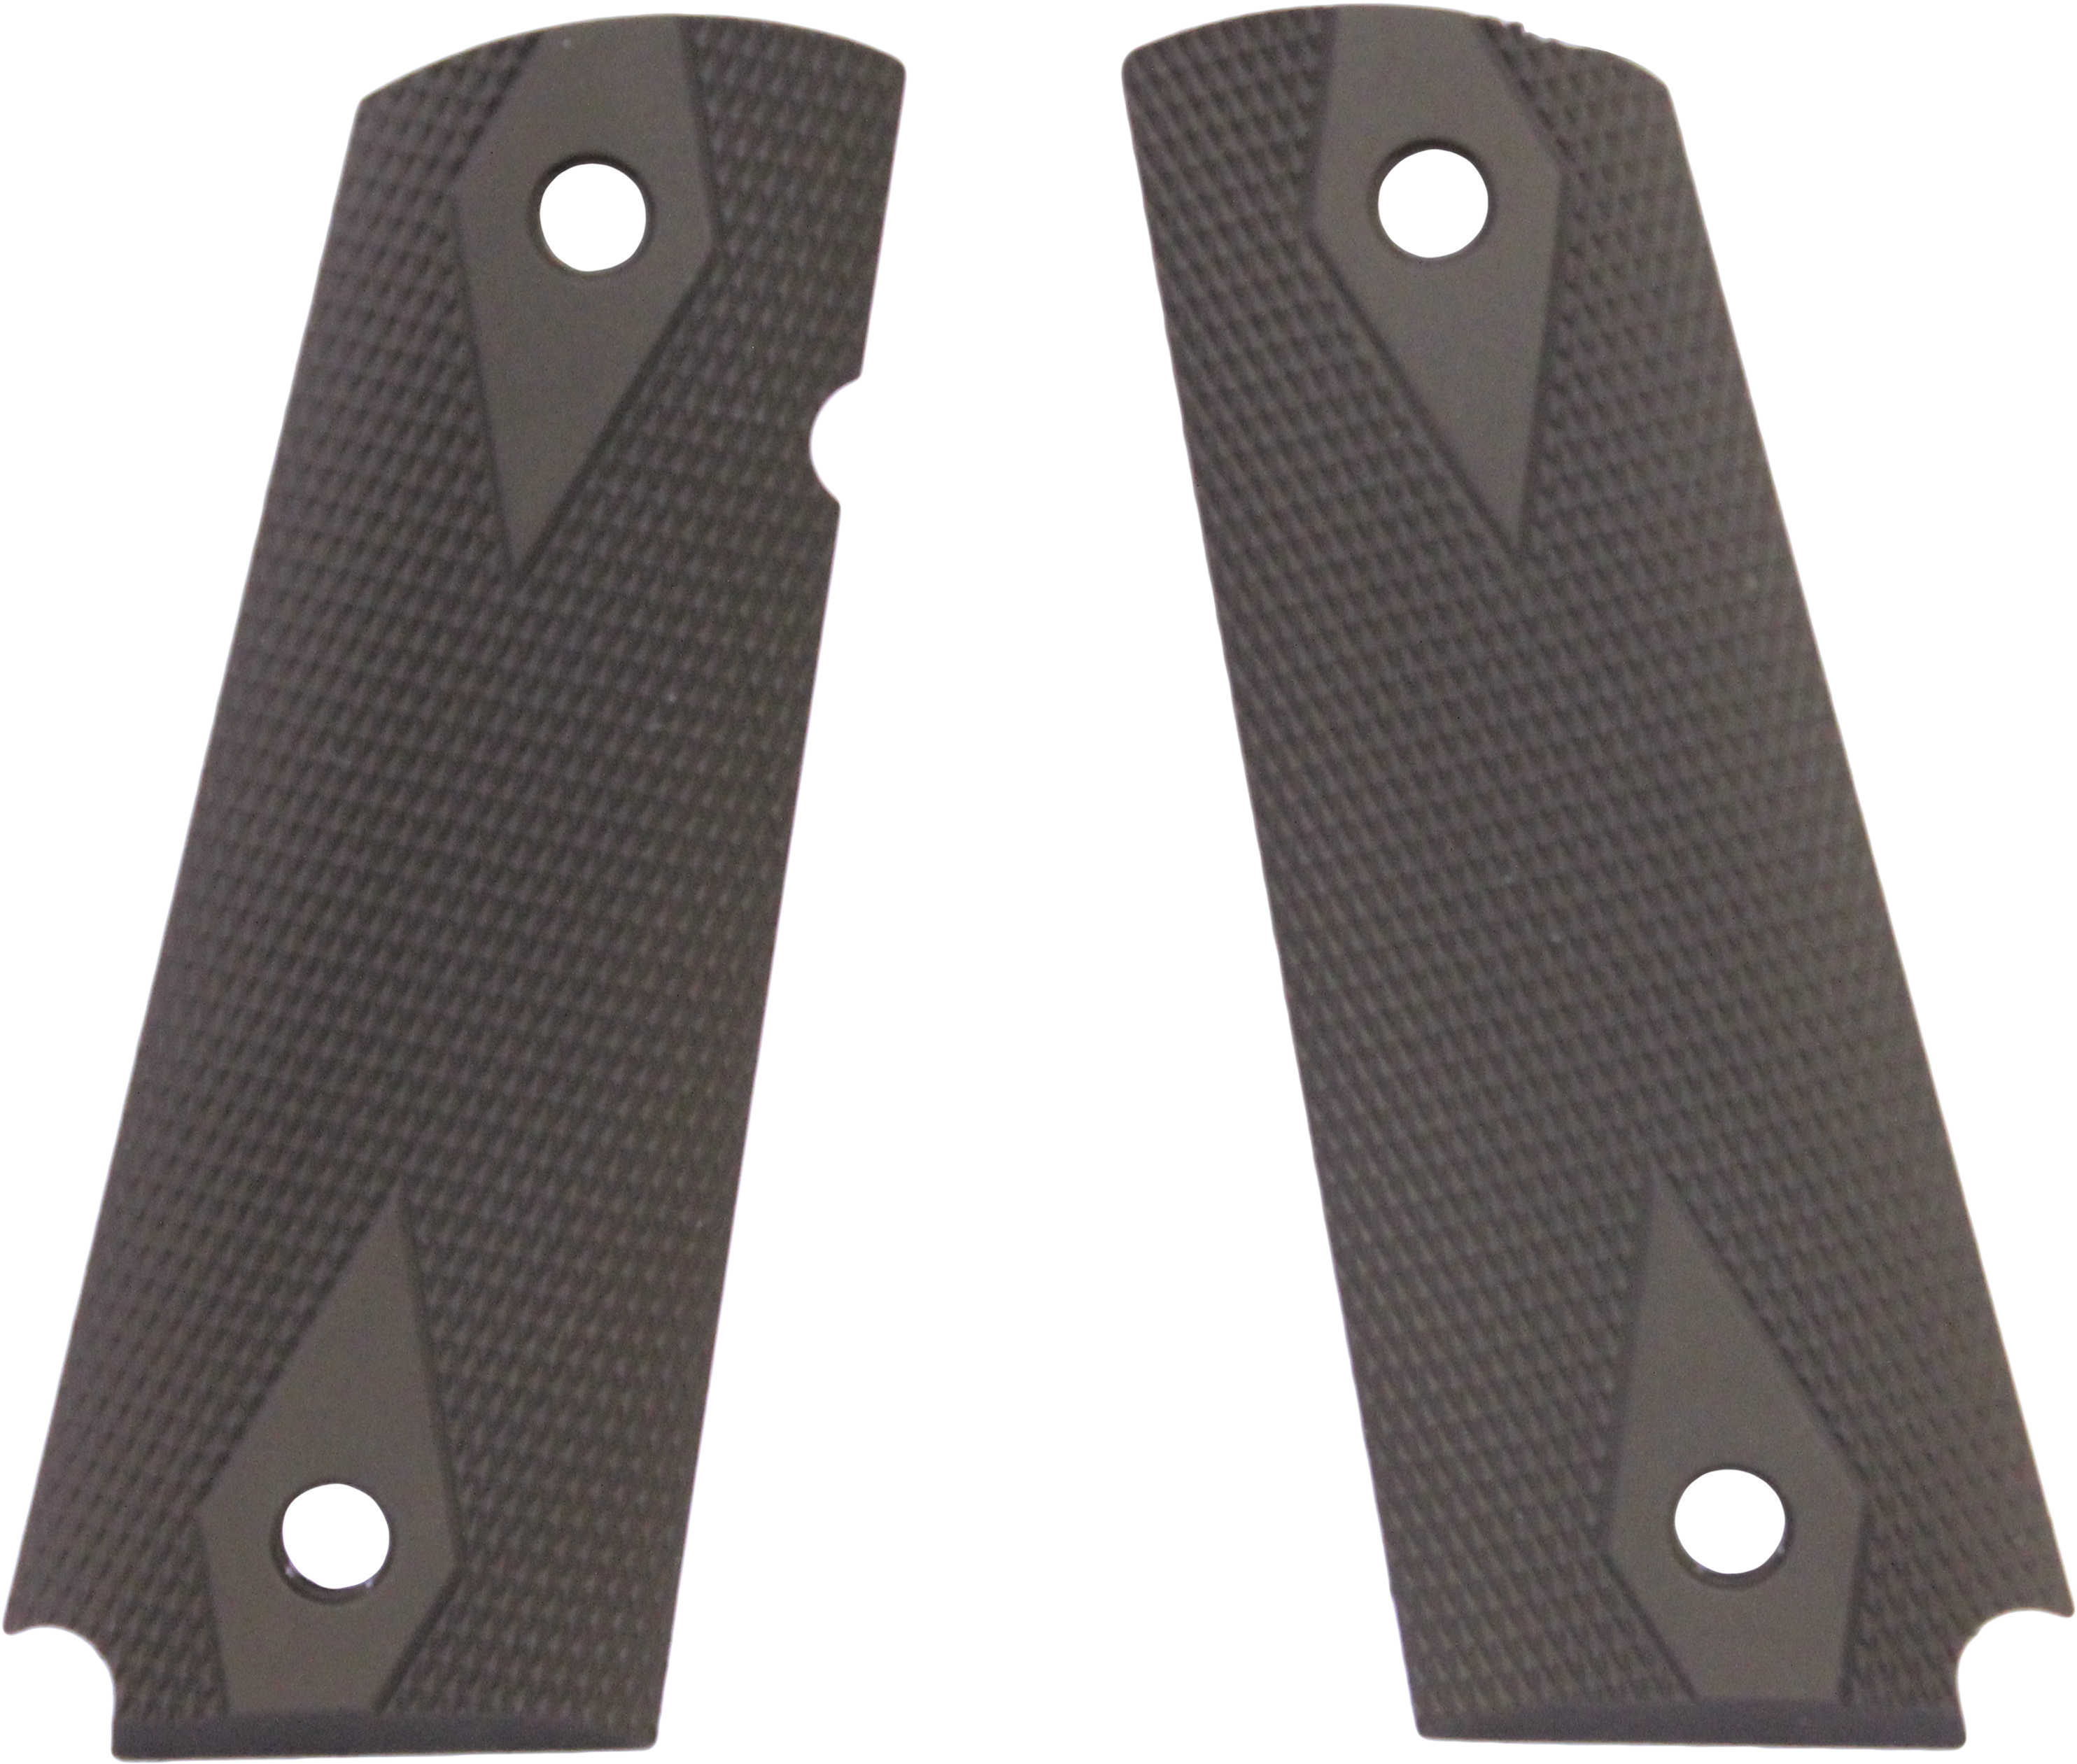 Hogue 1911 Government/Commander 3/16" Thin Grips Aluminum Checkered Matte Green Anodized 01471